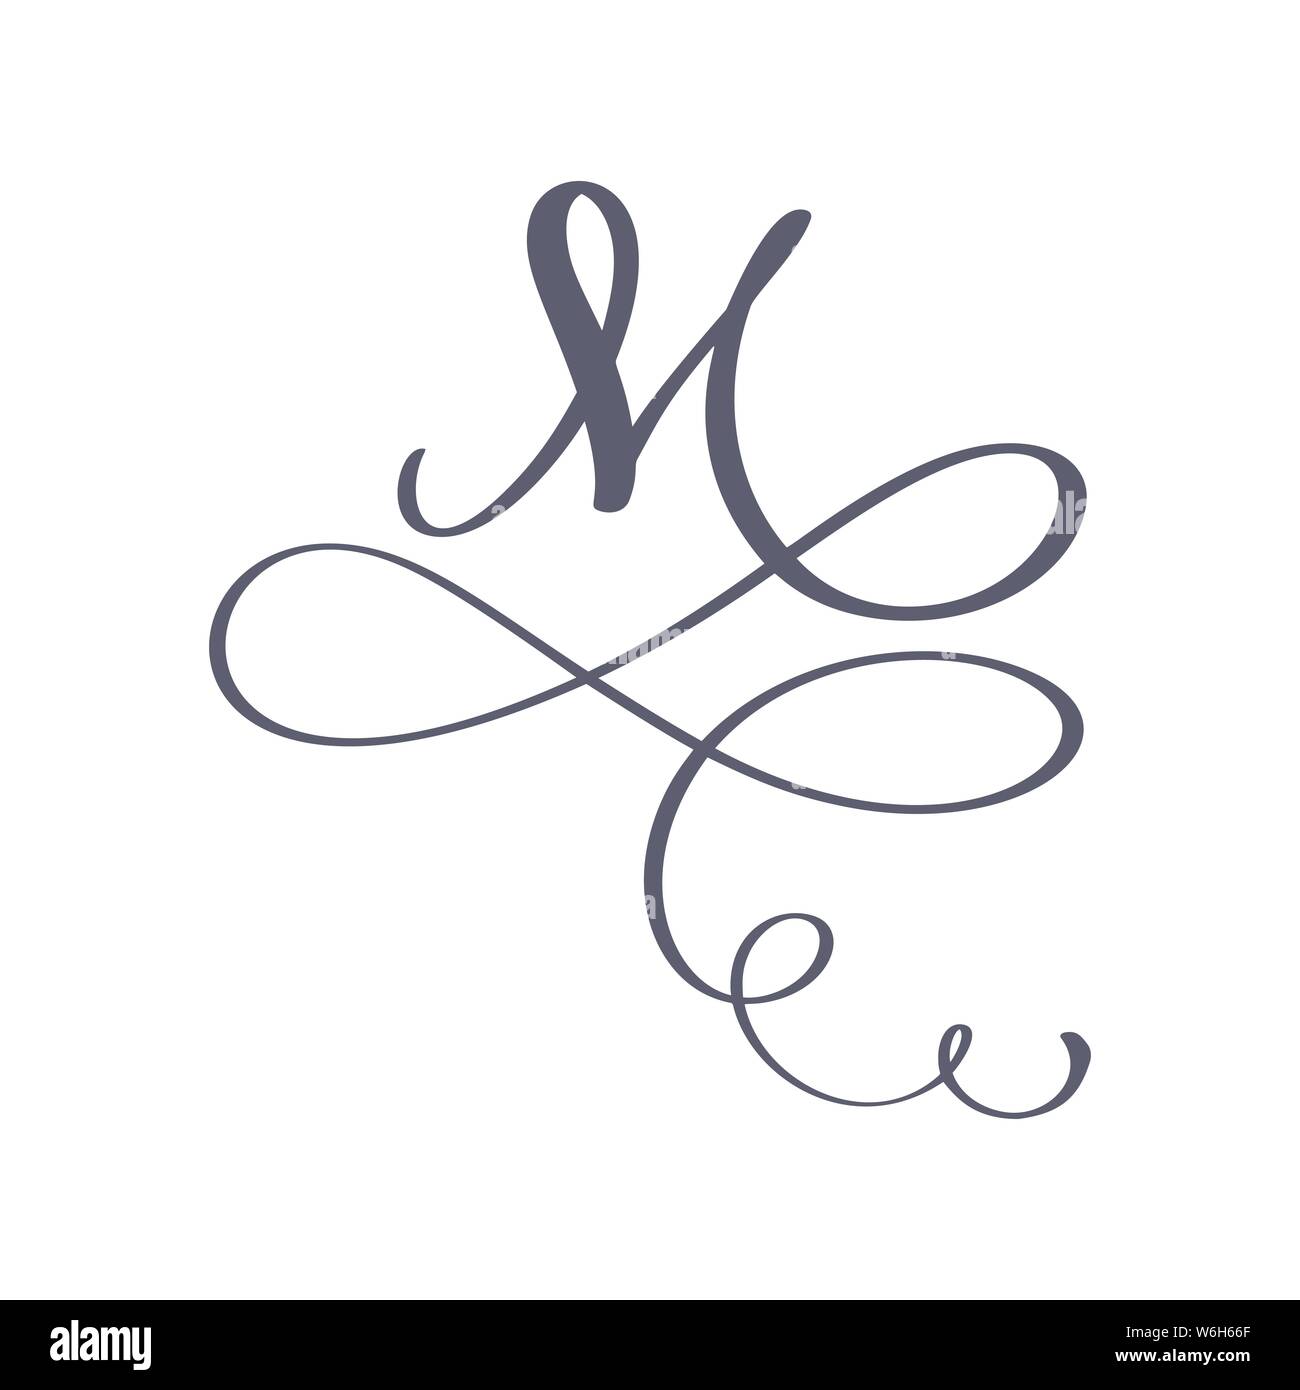 Vector Hand Drawn calligraphic floral M monogram or logo. Uppercase Hand Lettering Letter M with swirls and curl. Wedding Floral Design Stock Vector